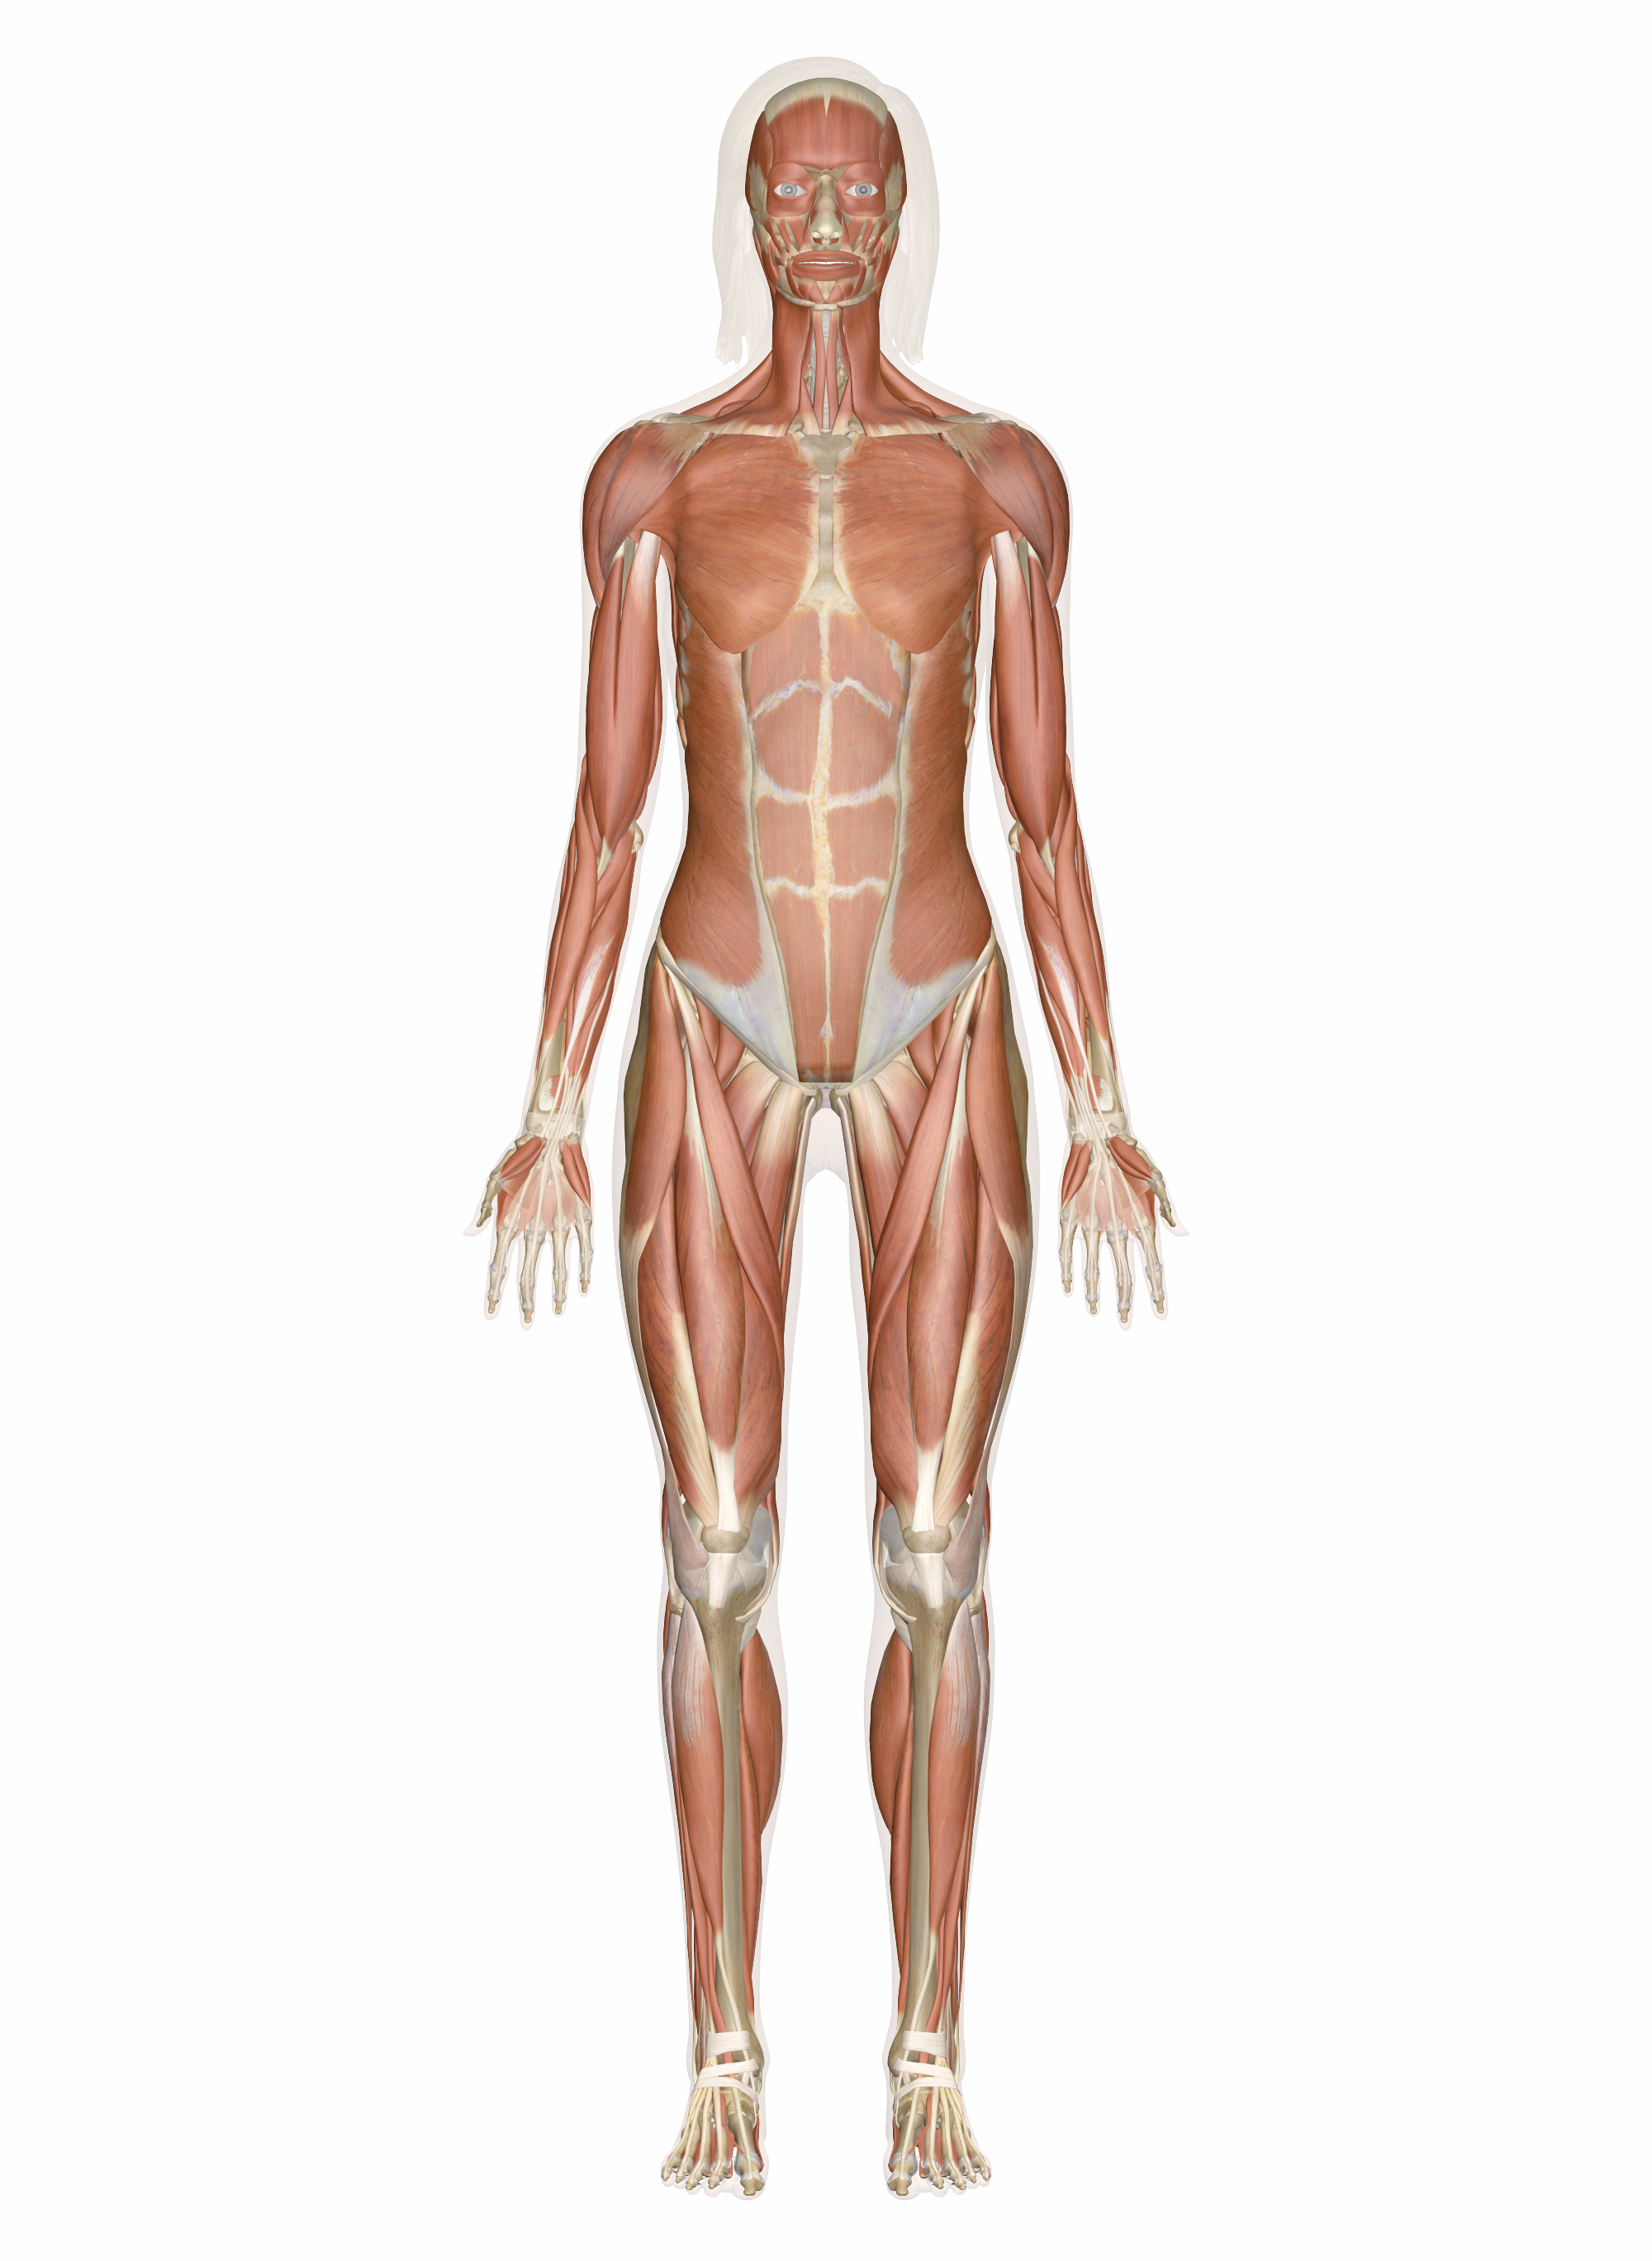 Human Muscle Diagram Muscular System Muscles Of The Human Body